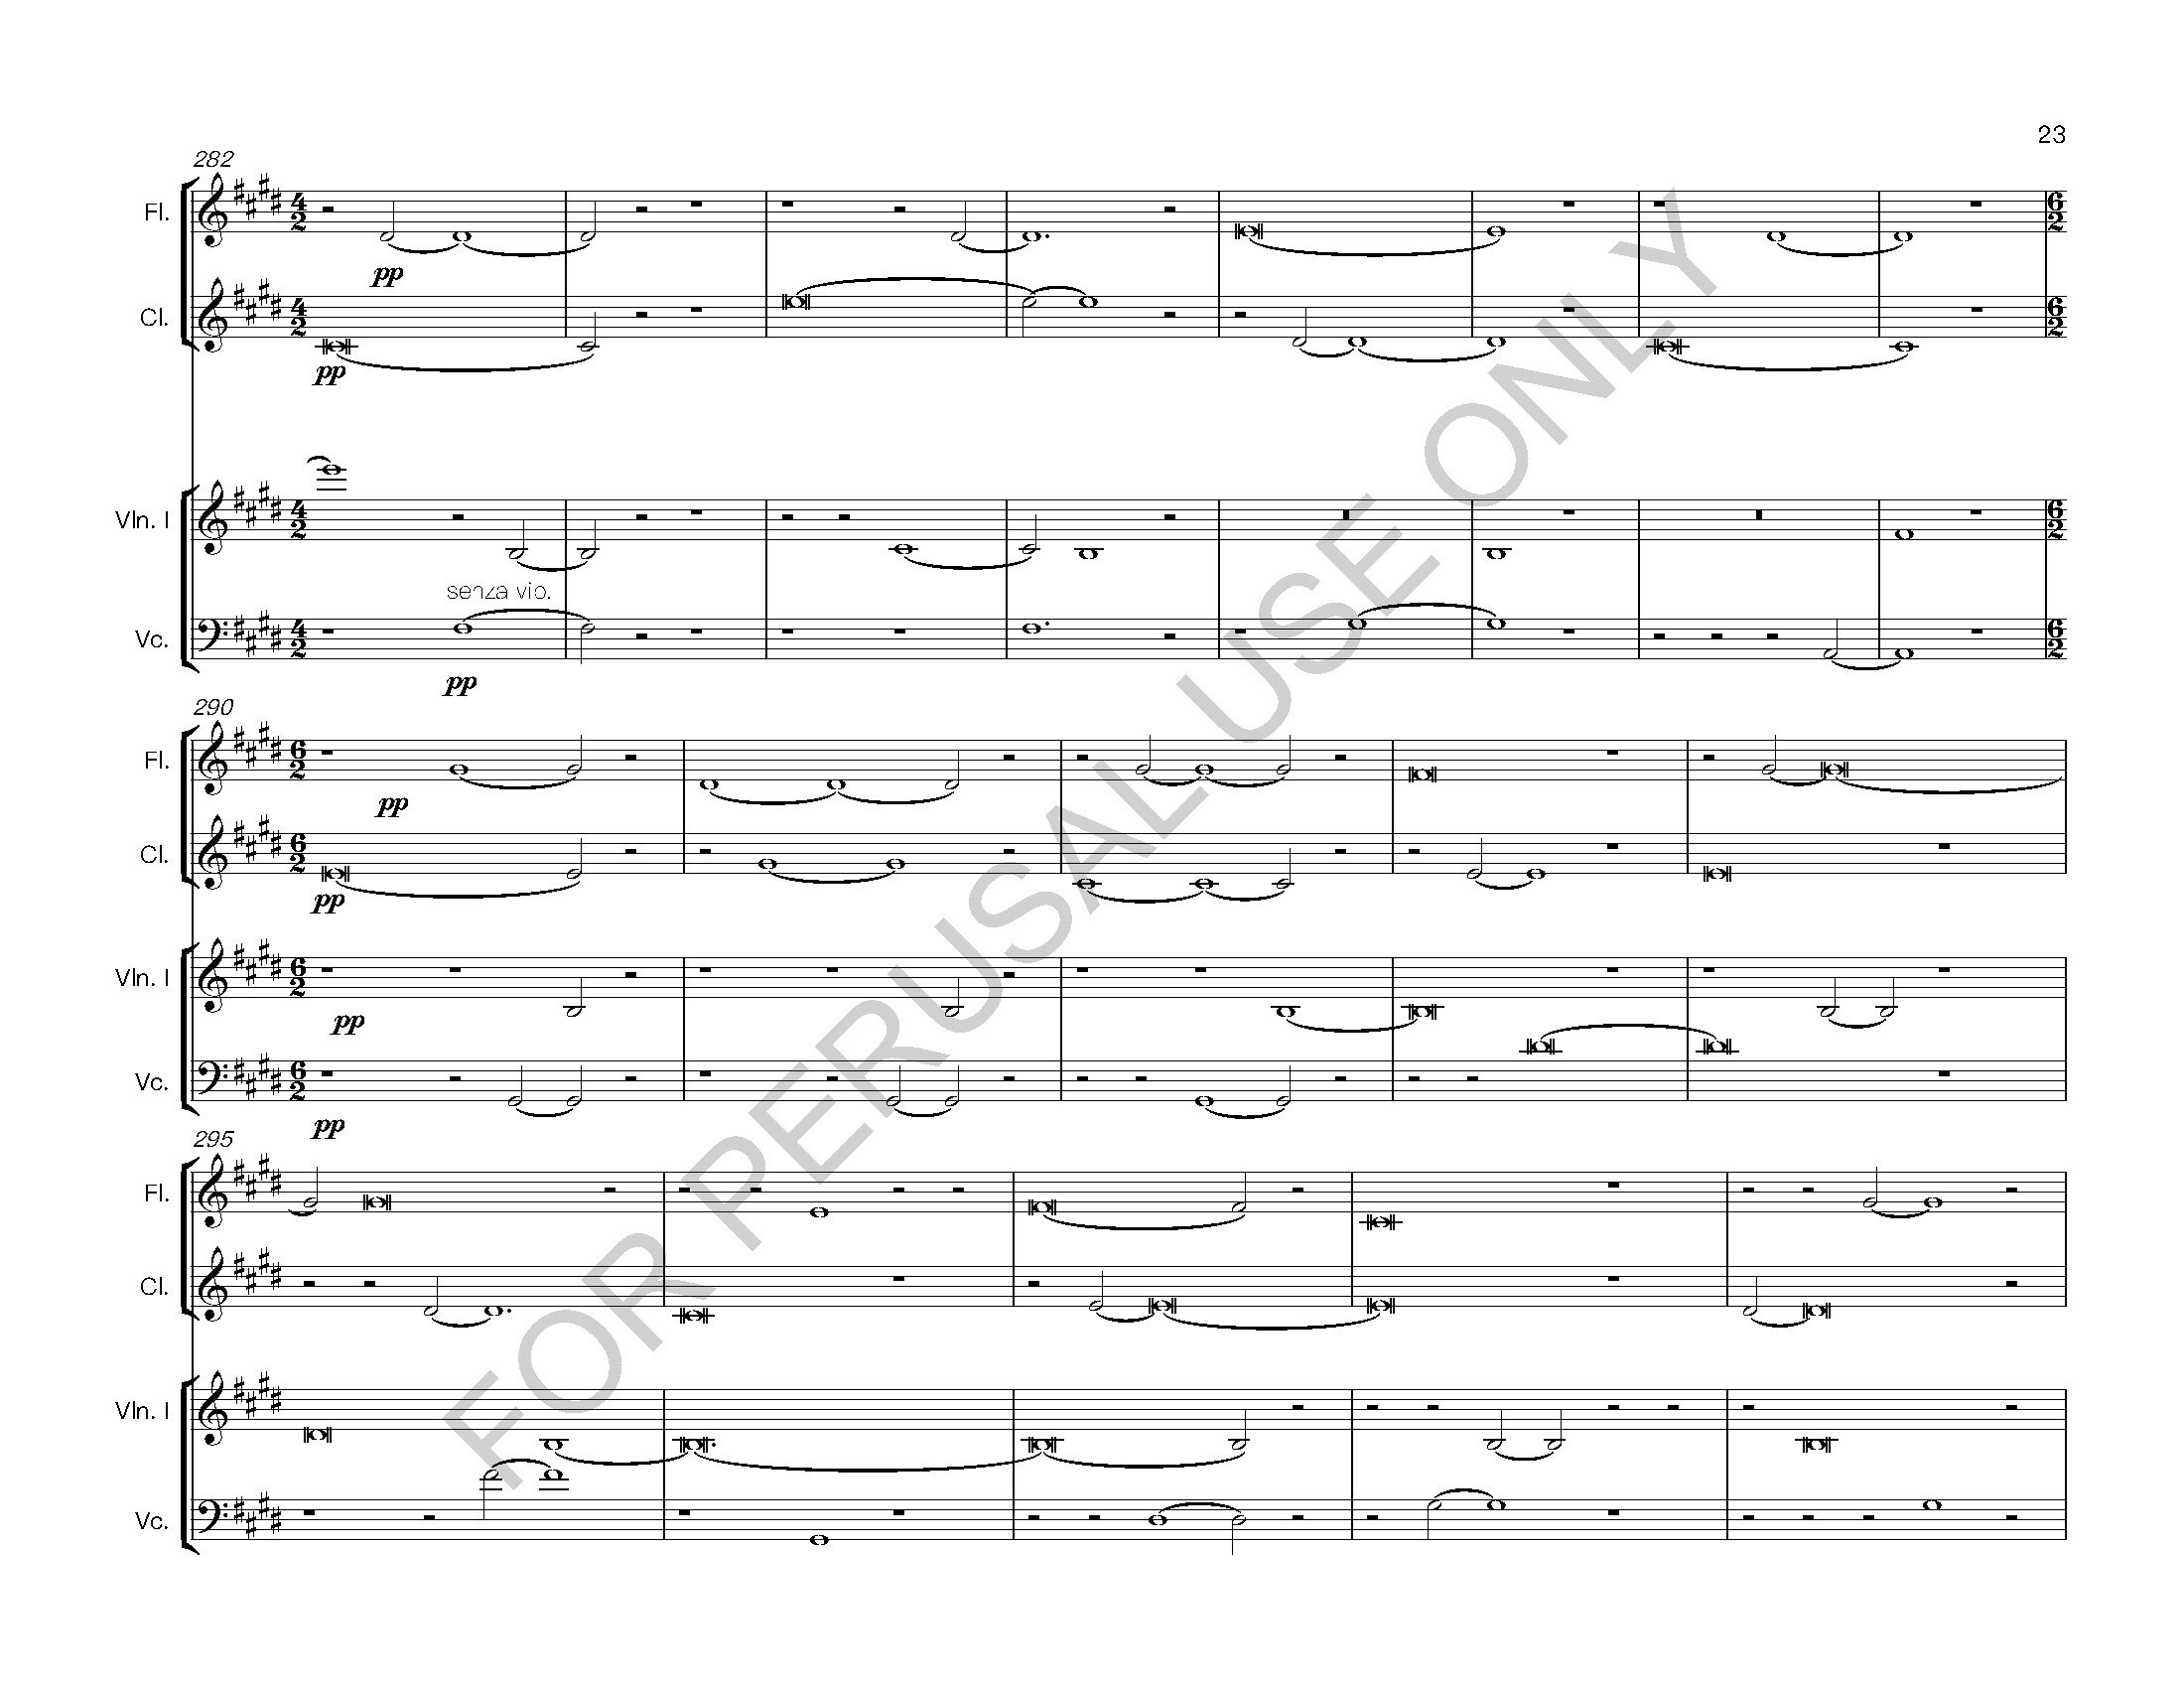 Thread the Needle - Full Score in C_Page_23.jpg